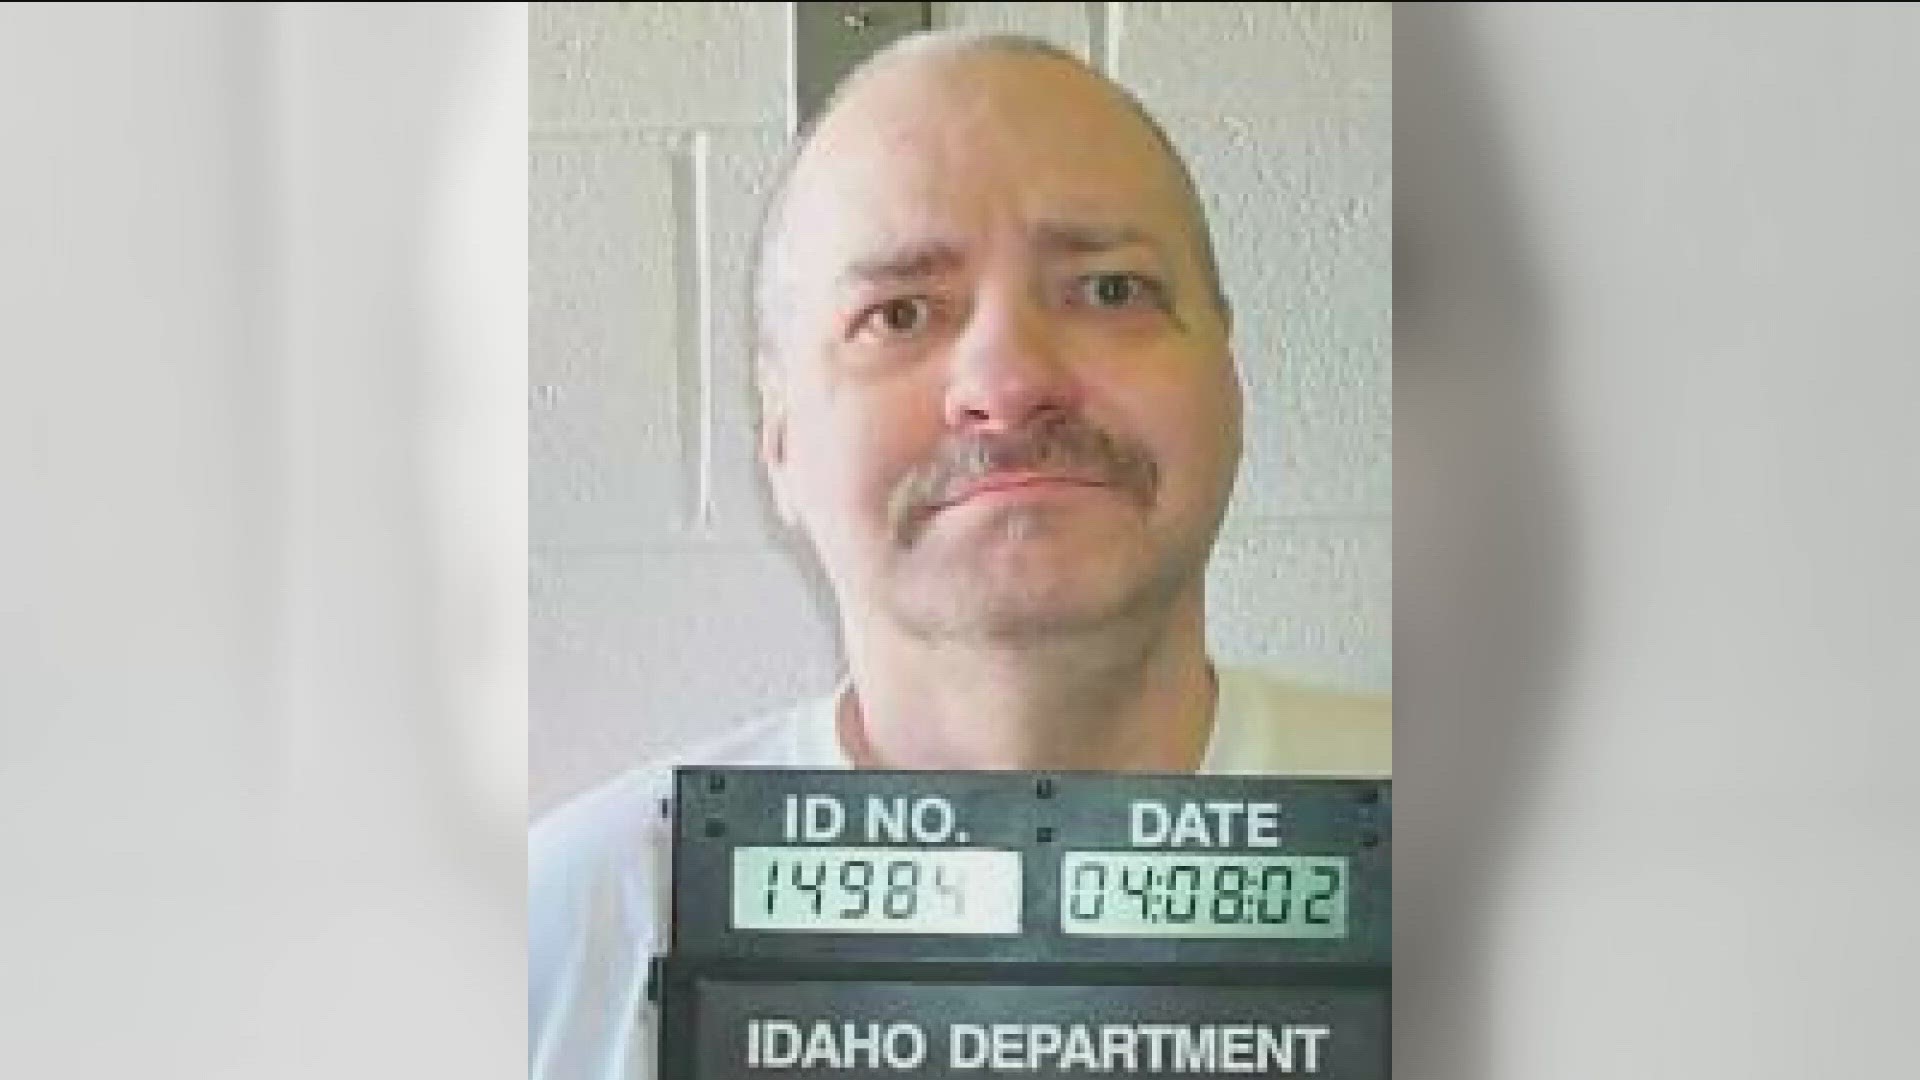 Creech has been convicted of five murders. He has been on death row for 40 years and is 73 years old.